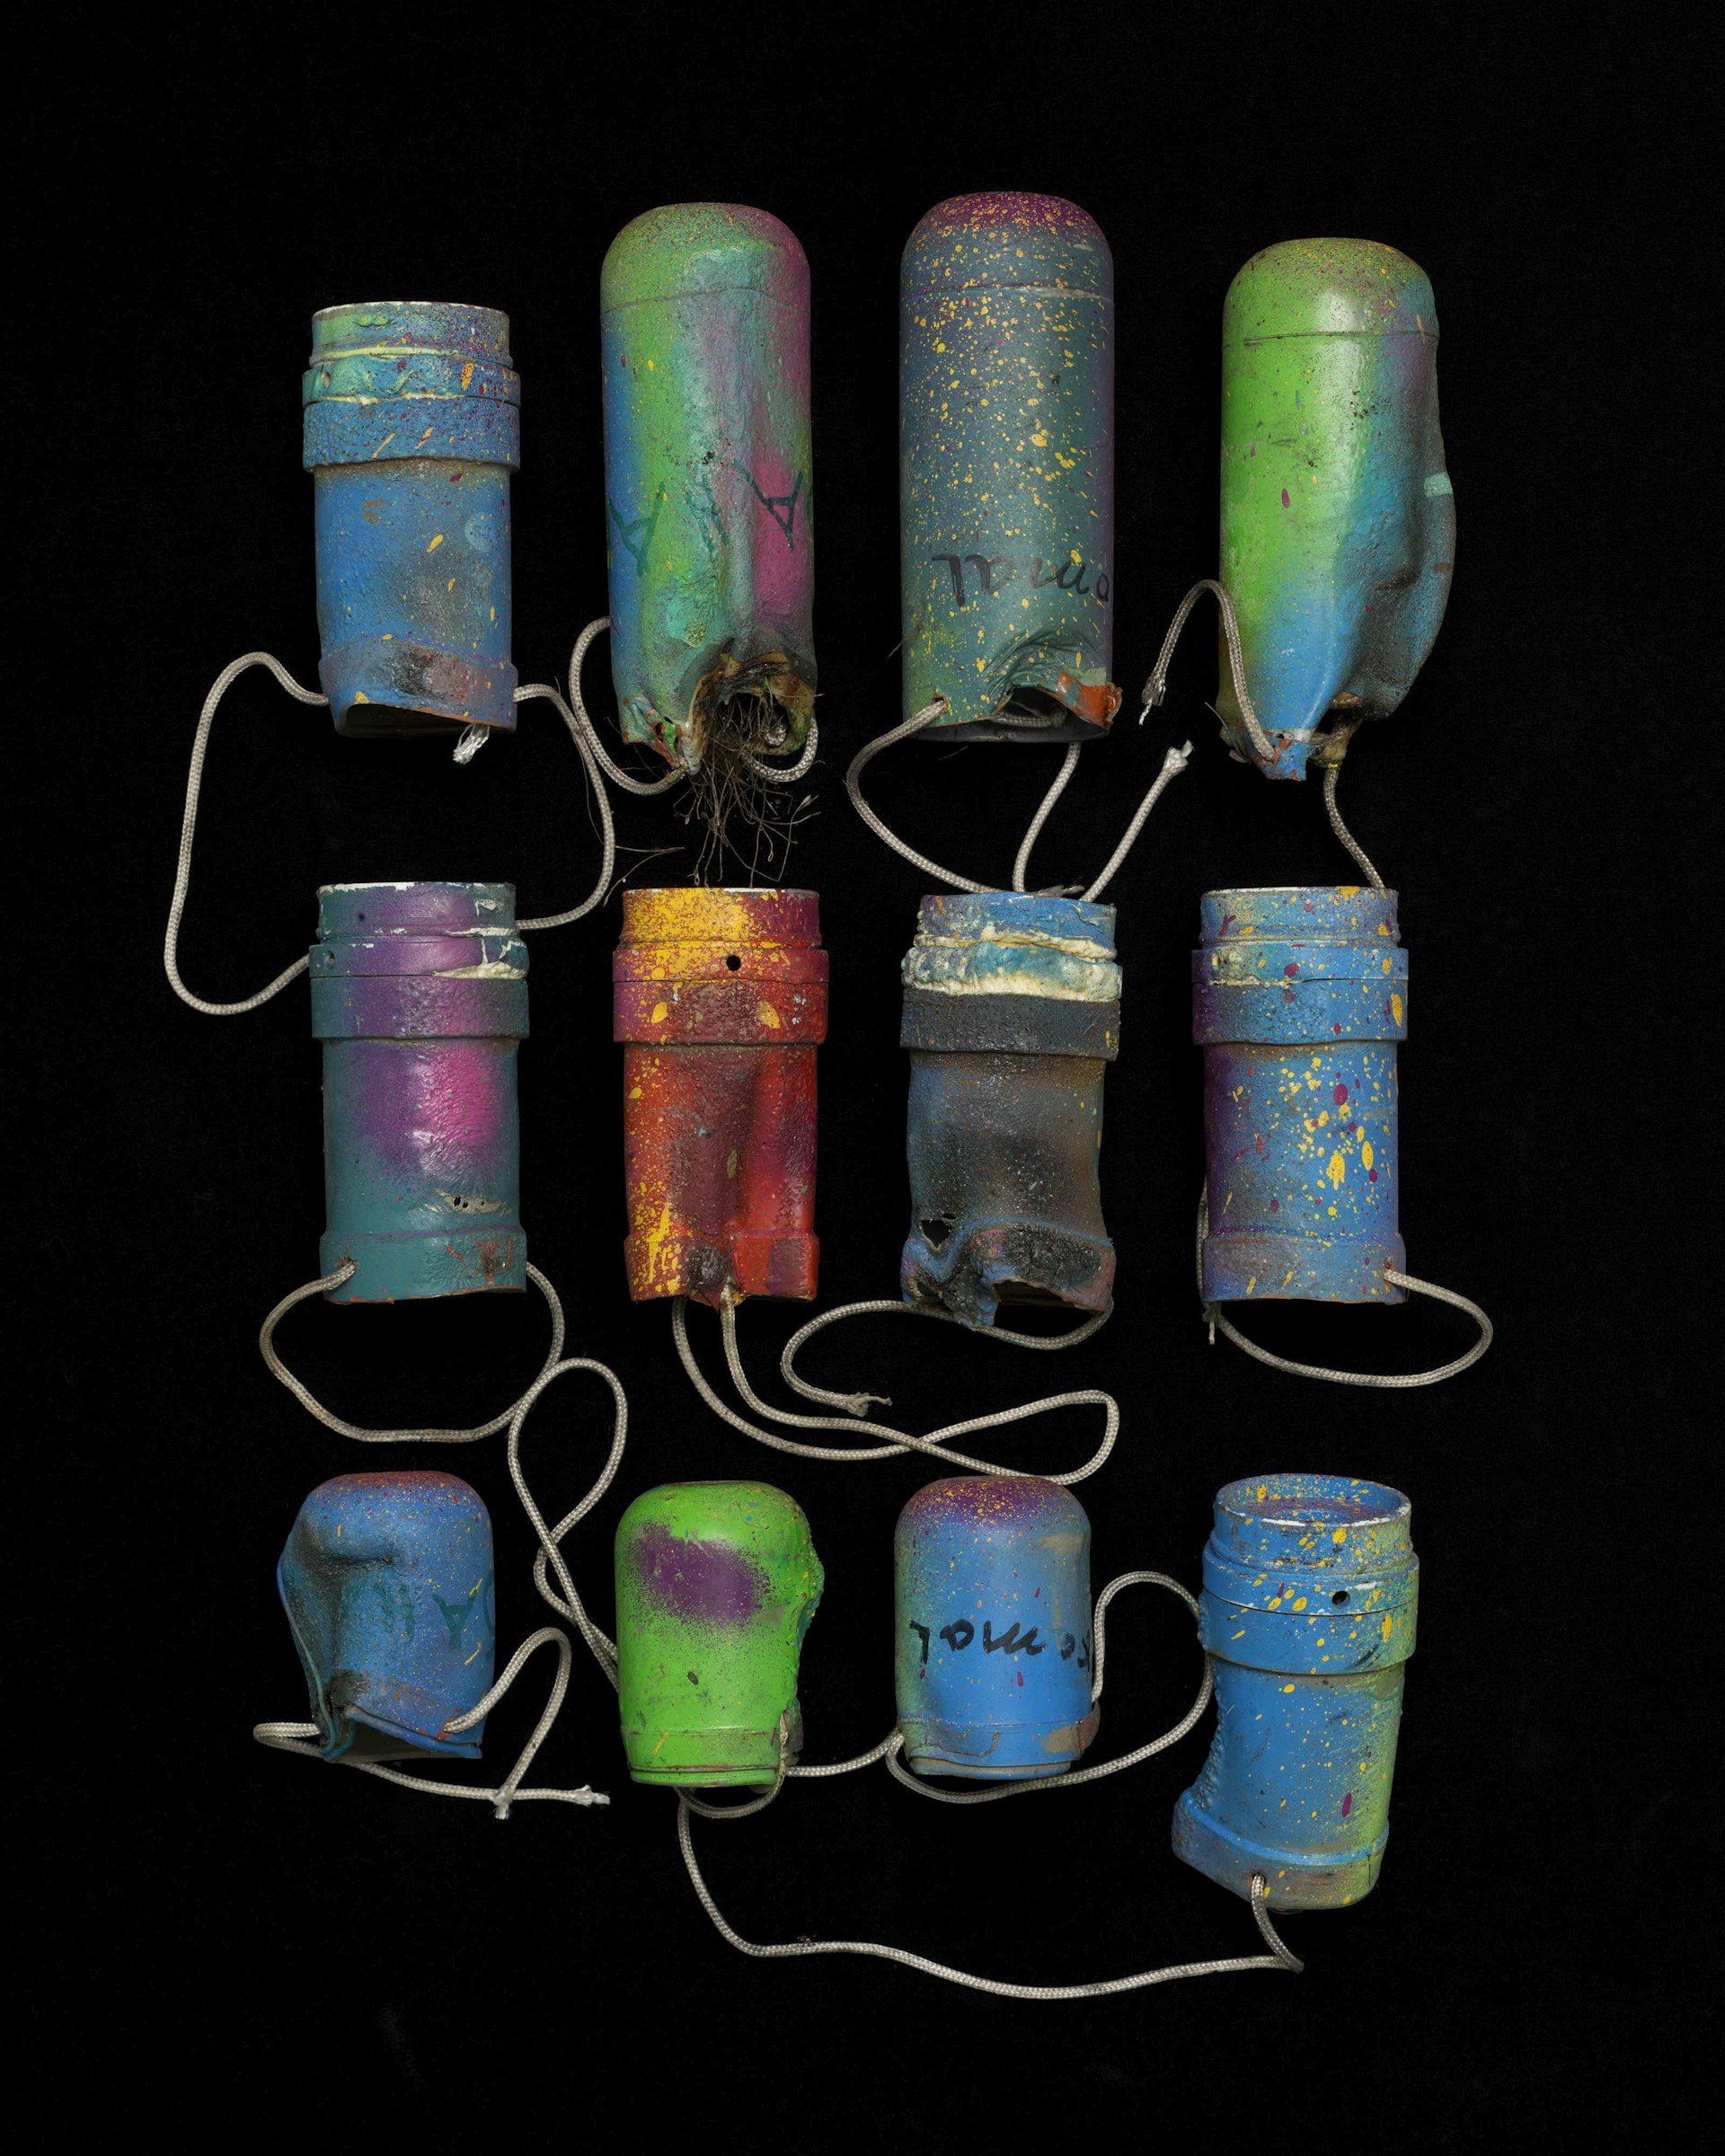  Decorated tear gas canisters Collected 28 October 2016 © Gideon Mendel